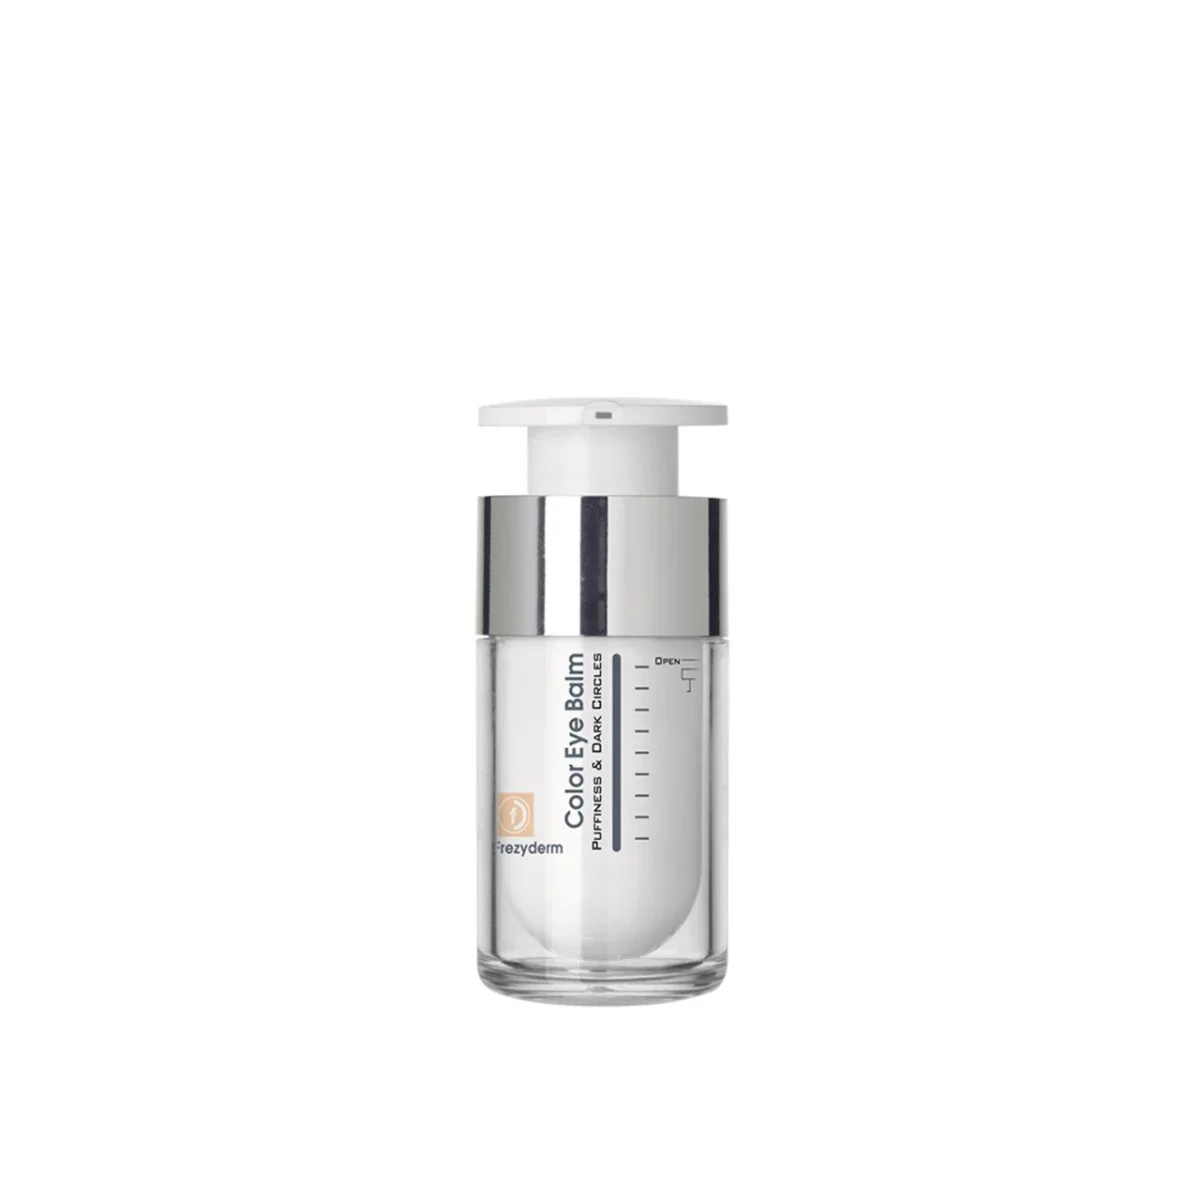 Frezyderm Color Eye Balm Puffiness and Dark Cirlce - 15ml at skinperfection.world